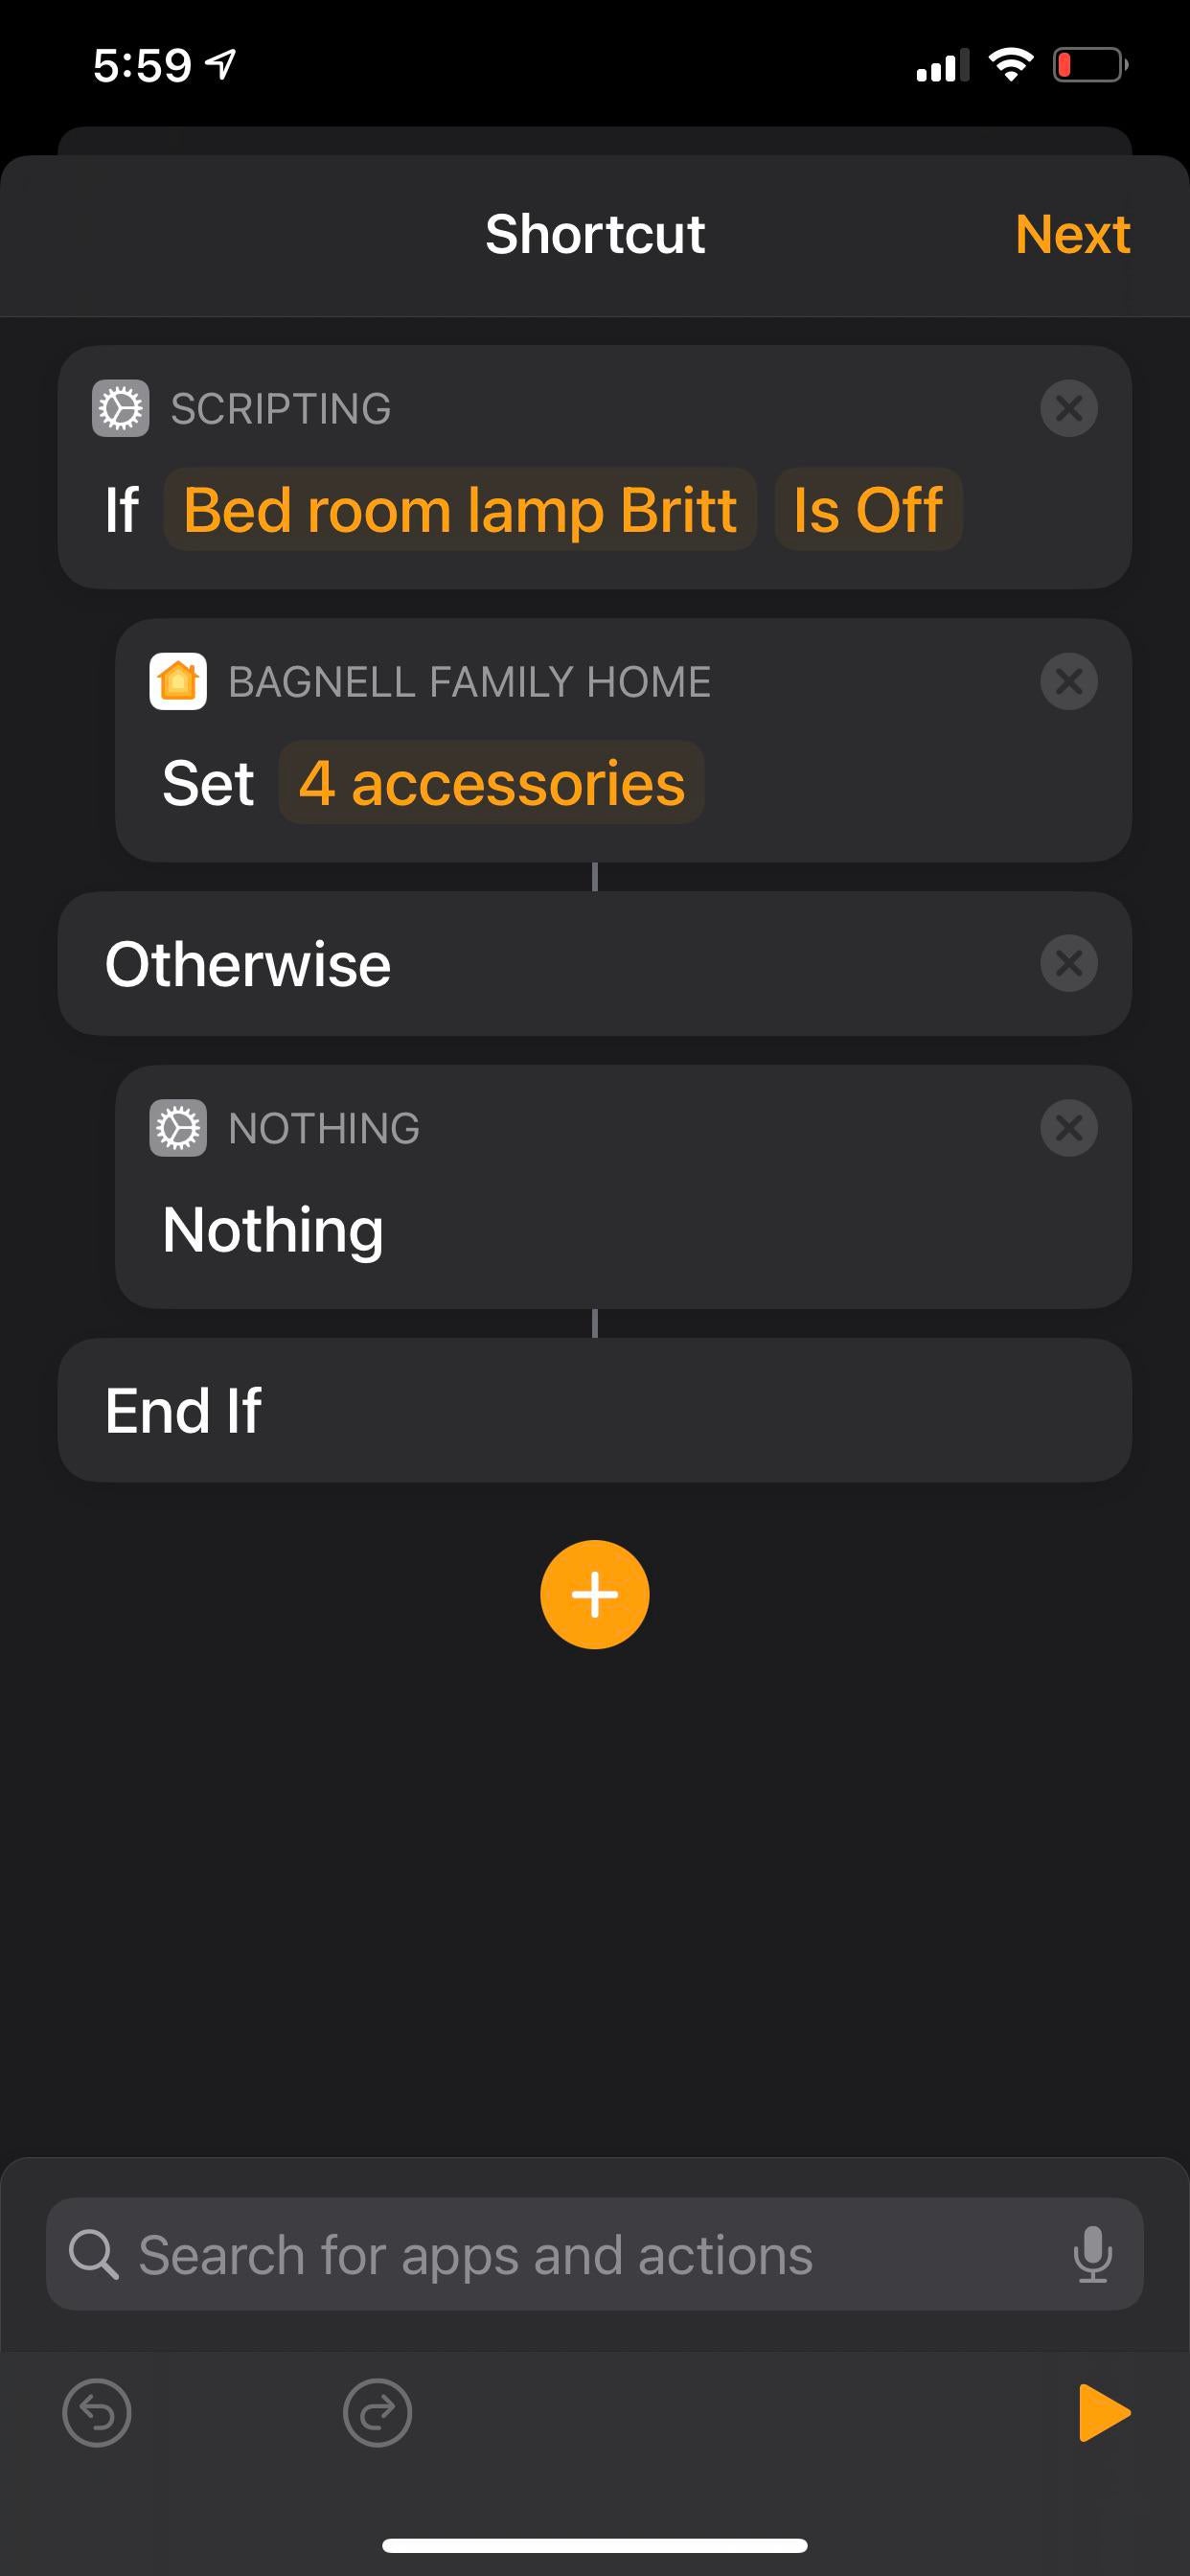 This shortcut automation sets a light to 99 brightness triggered